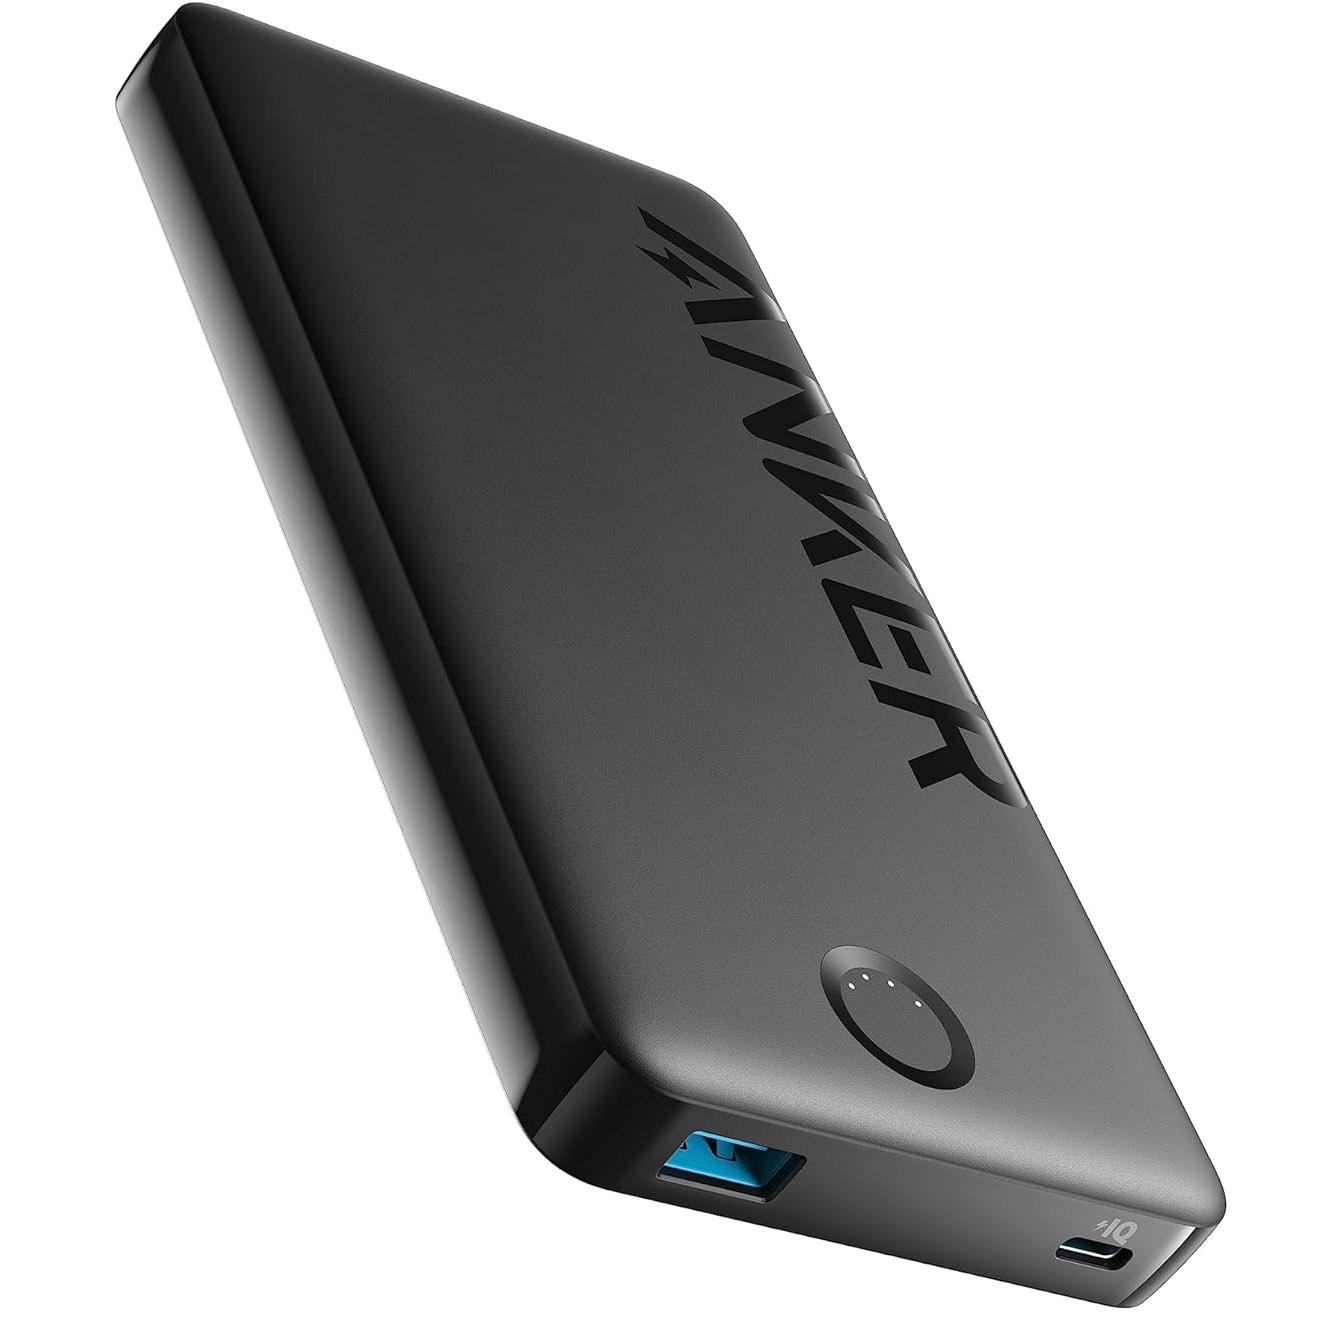 Anker Power Bank 10000mAh PowerCore PIQ Portable Charger for $12.63